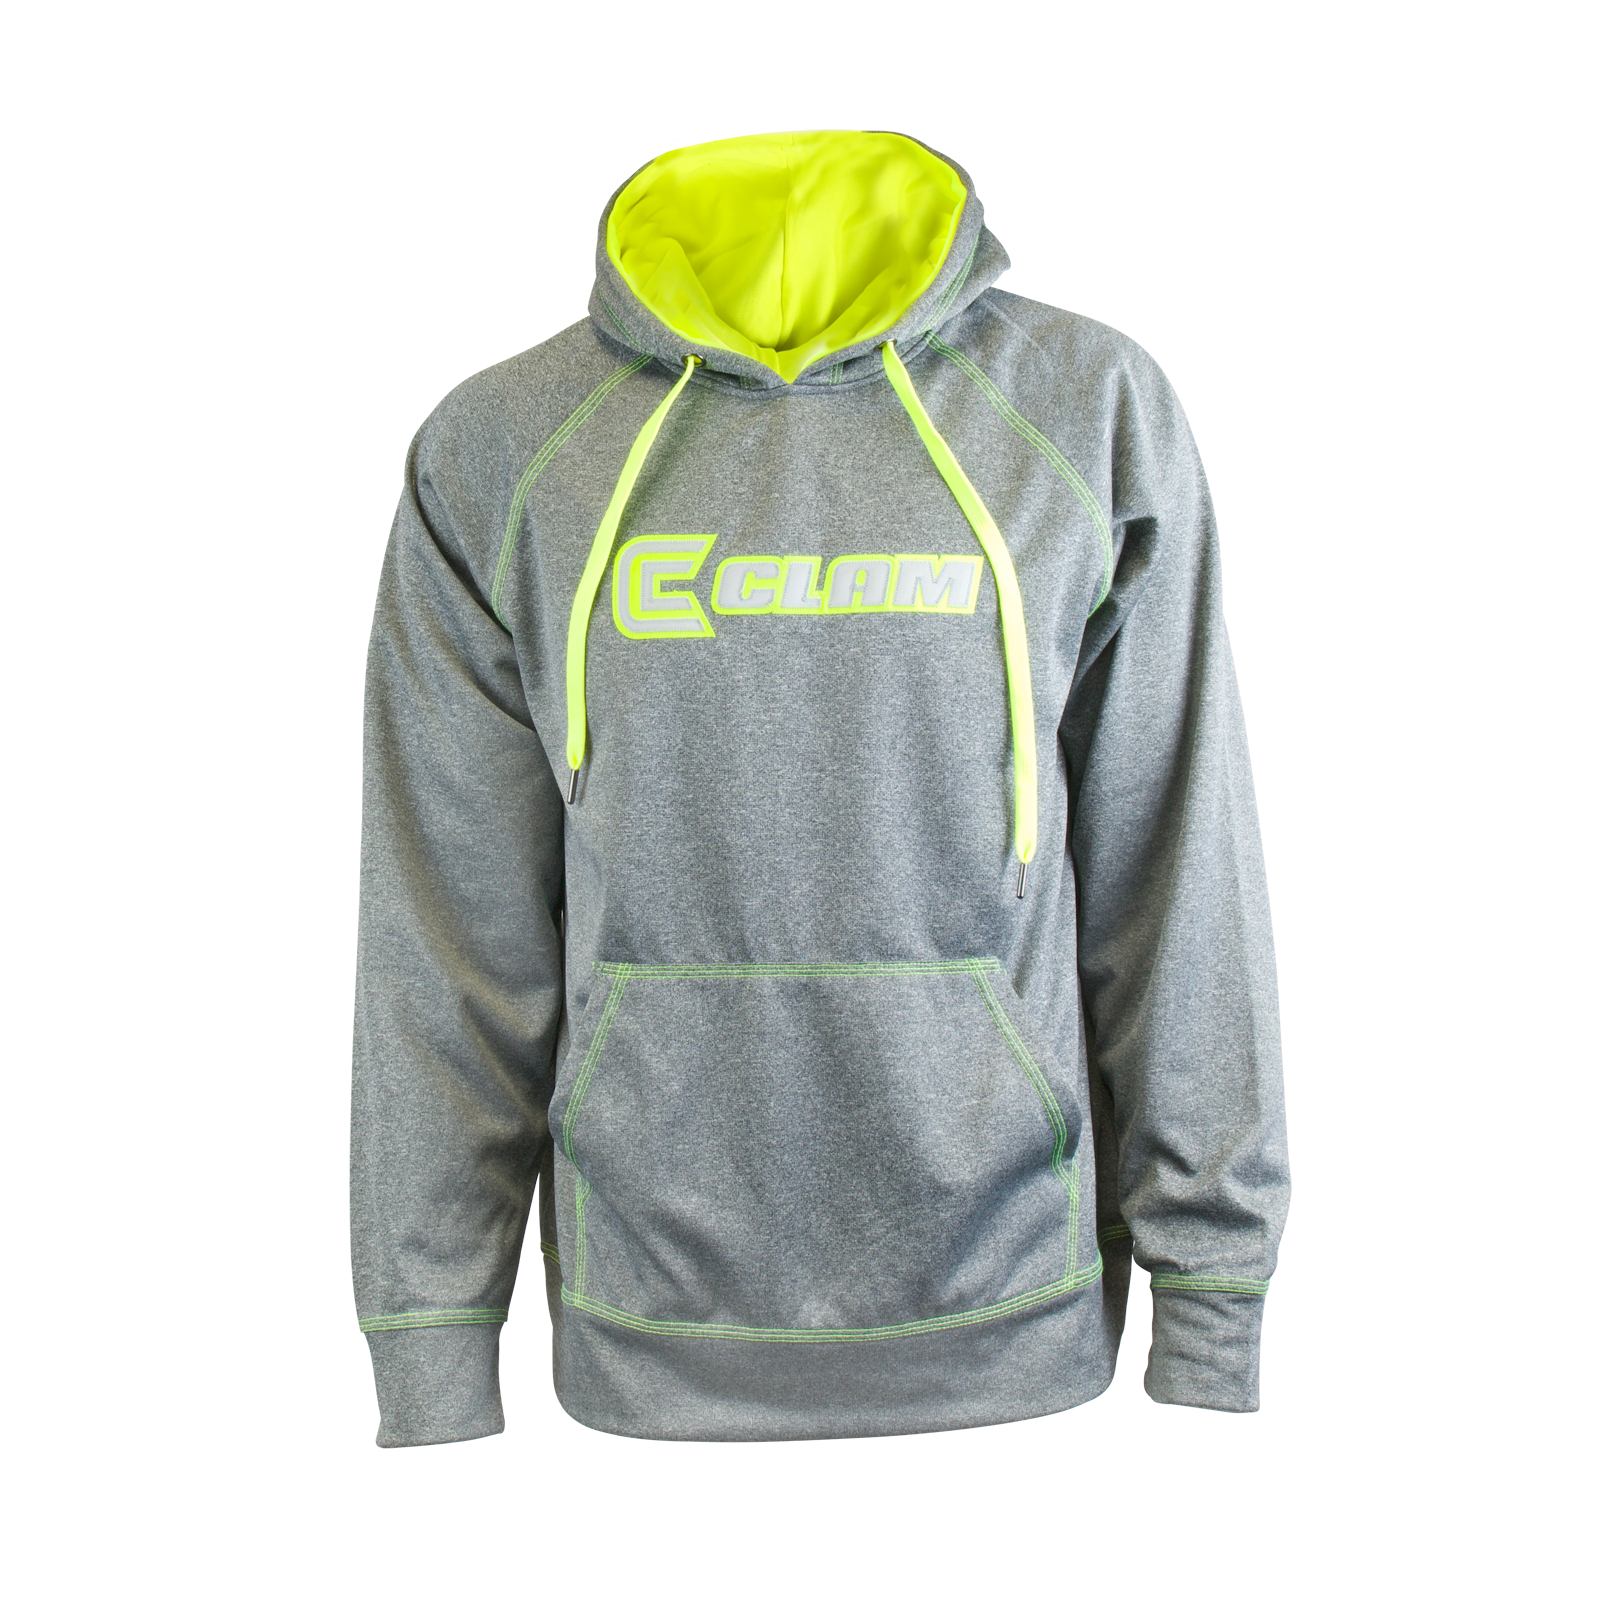 https://static.upnorthsports.com/Image/catimages/12821-12826_Clam-Performance-Hoodie-1600.png